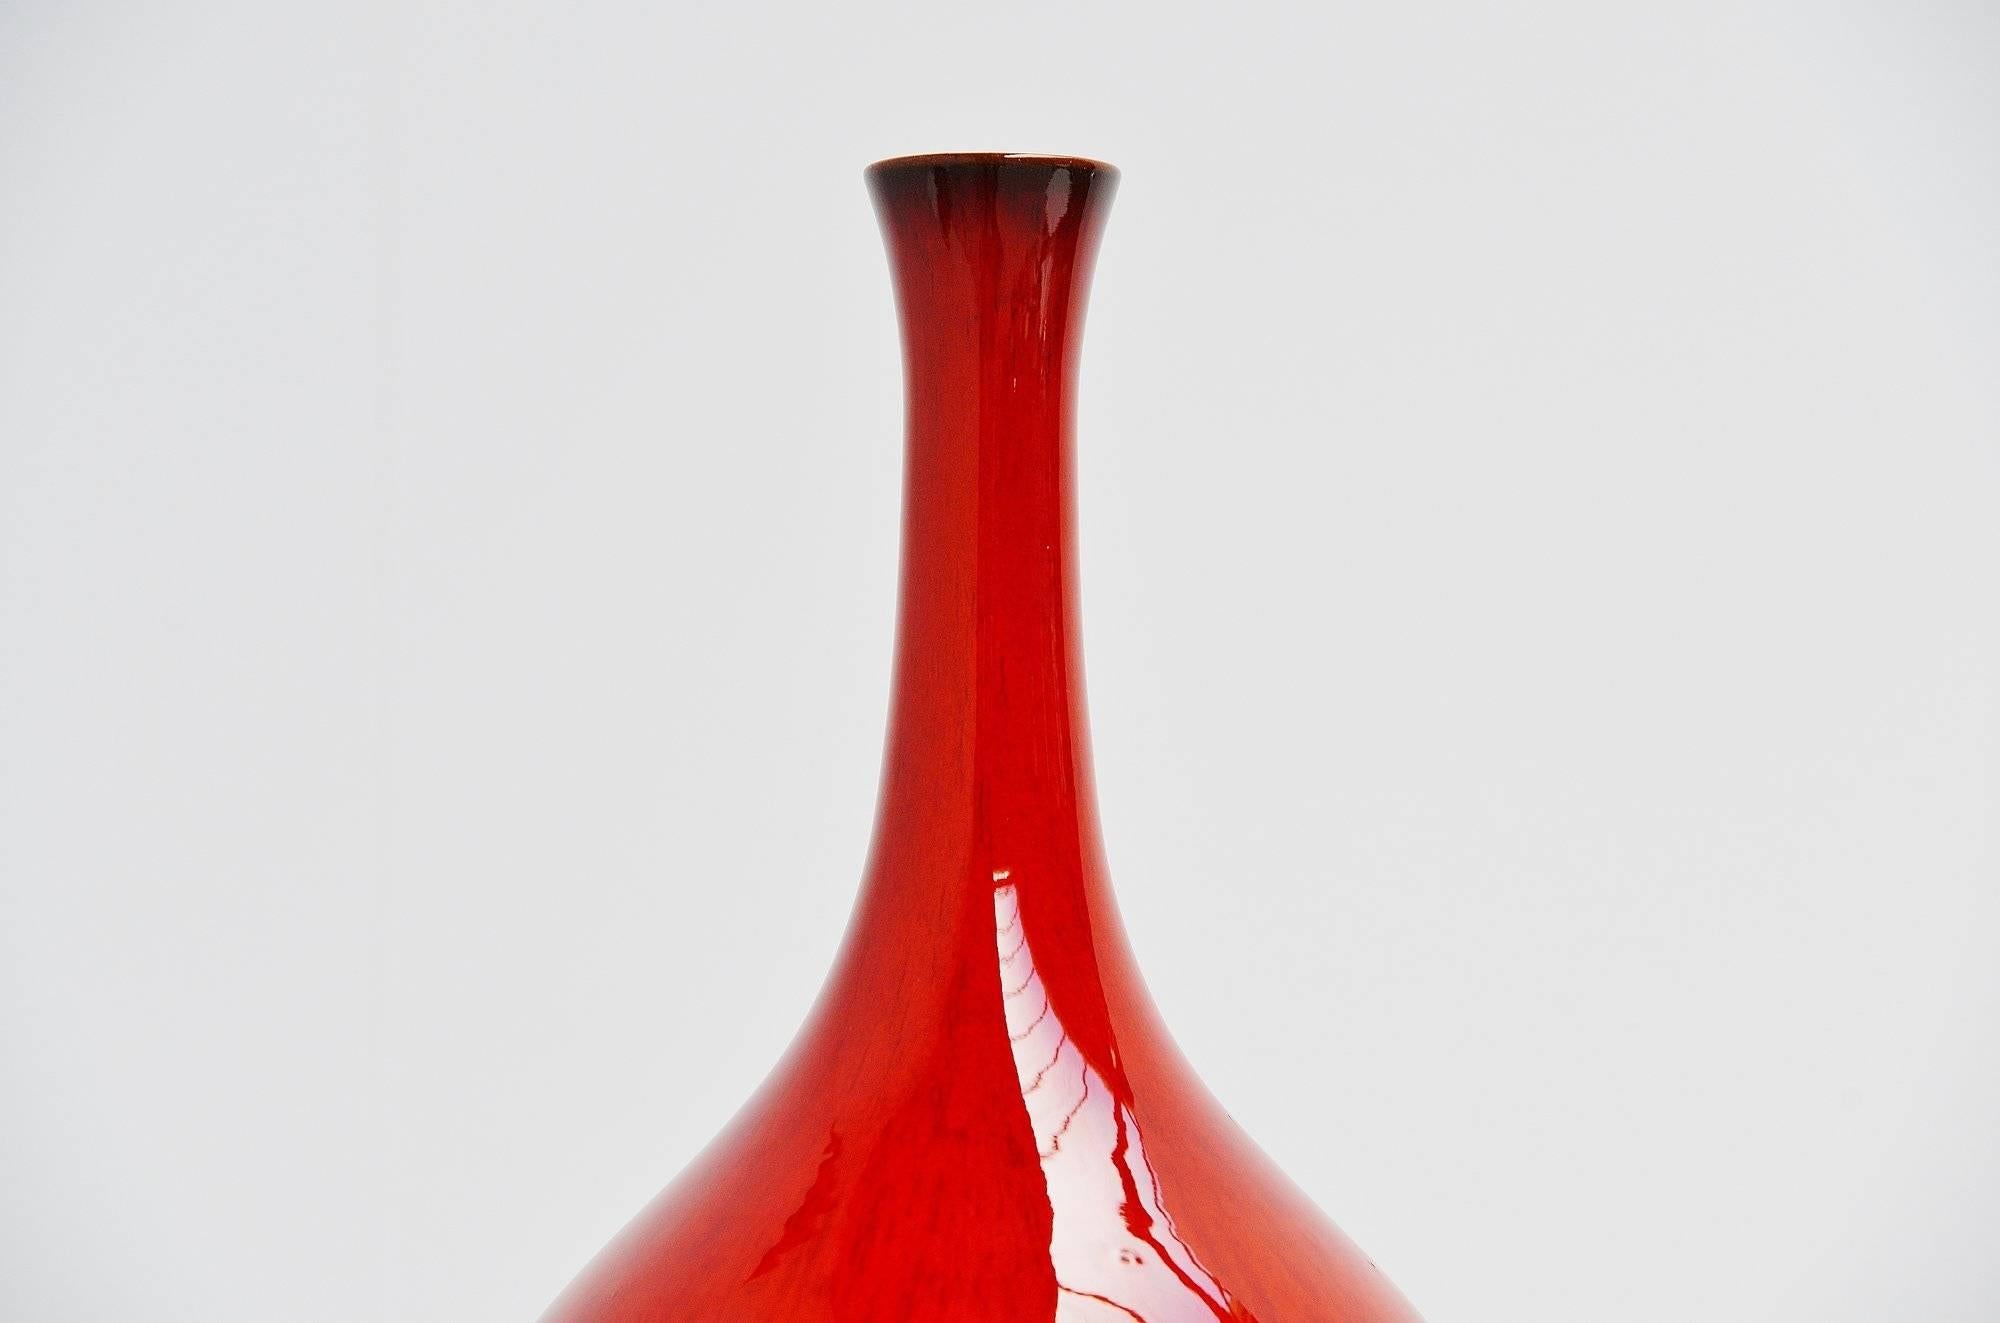 Highly decorative and nice ceramic vase designed by Rogier Vandeweghe and manufactured by Amphora, Belgium, 1963. This vase has an amazing shape and red glaze and would look highly decorative in any modern home or interior. The vase is signed with